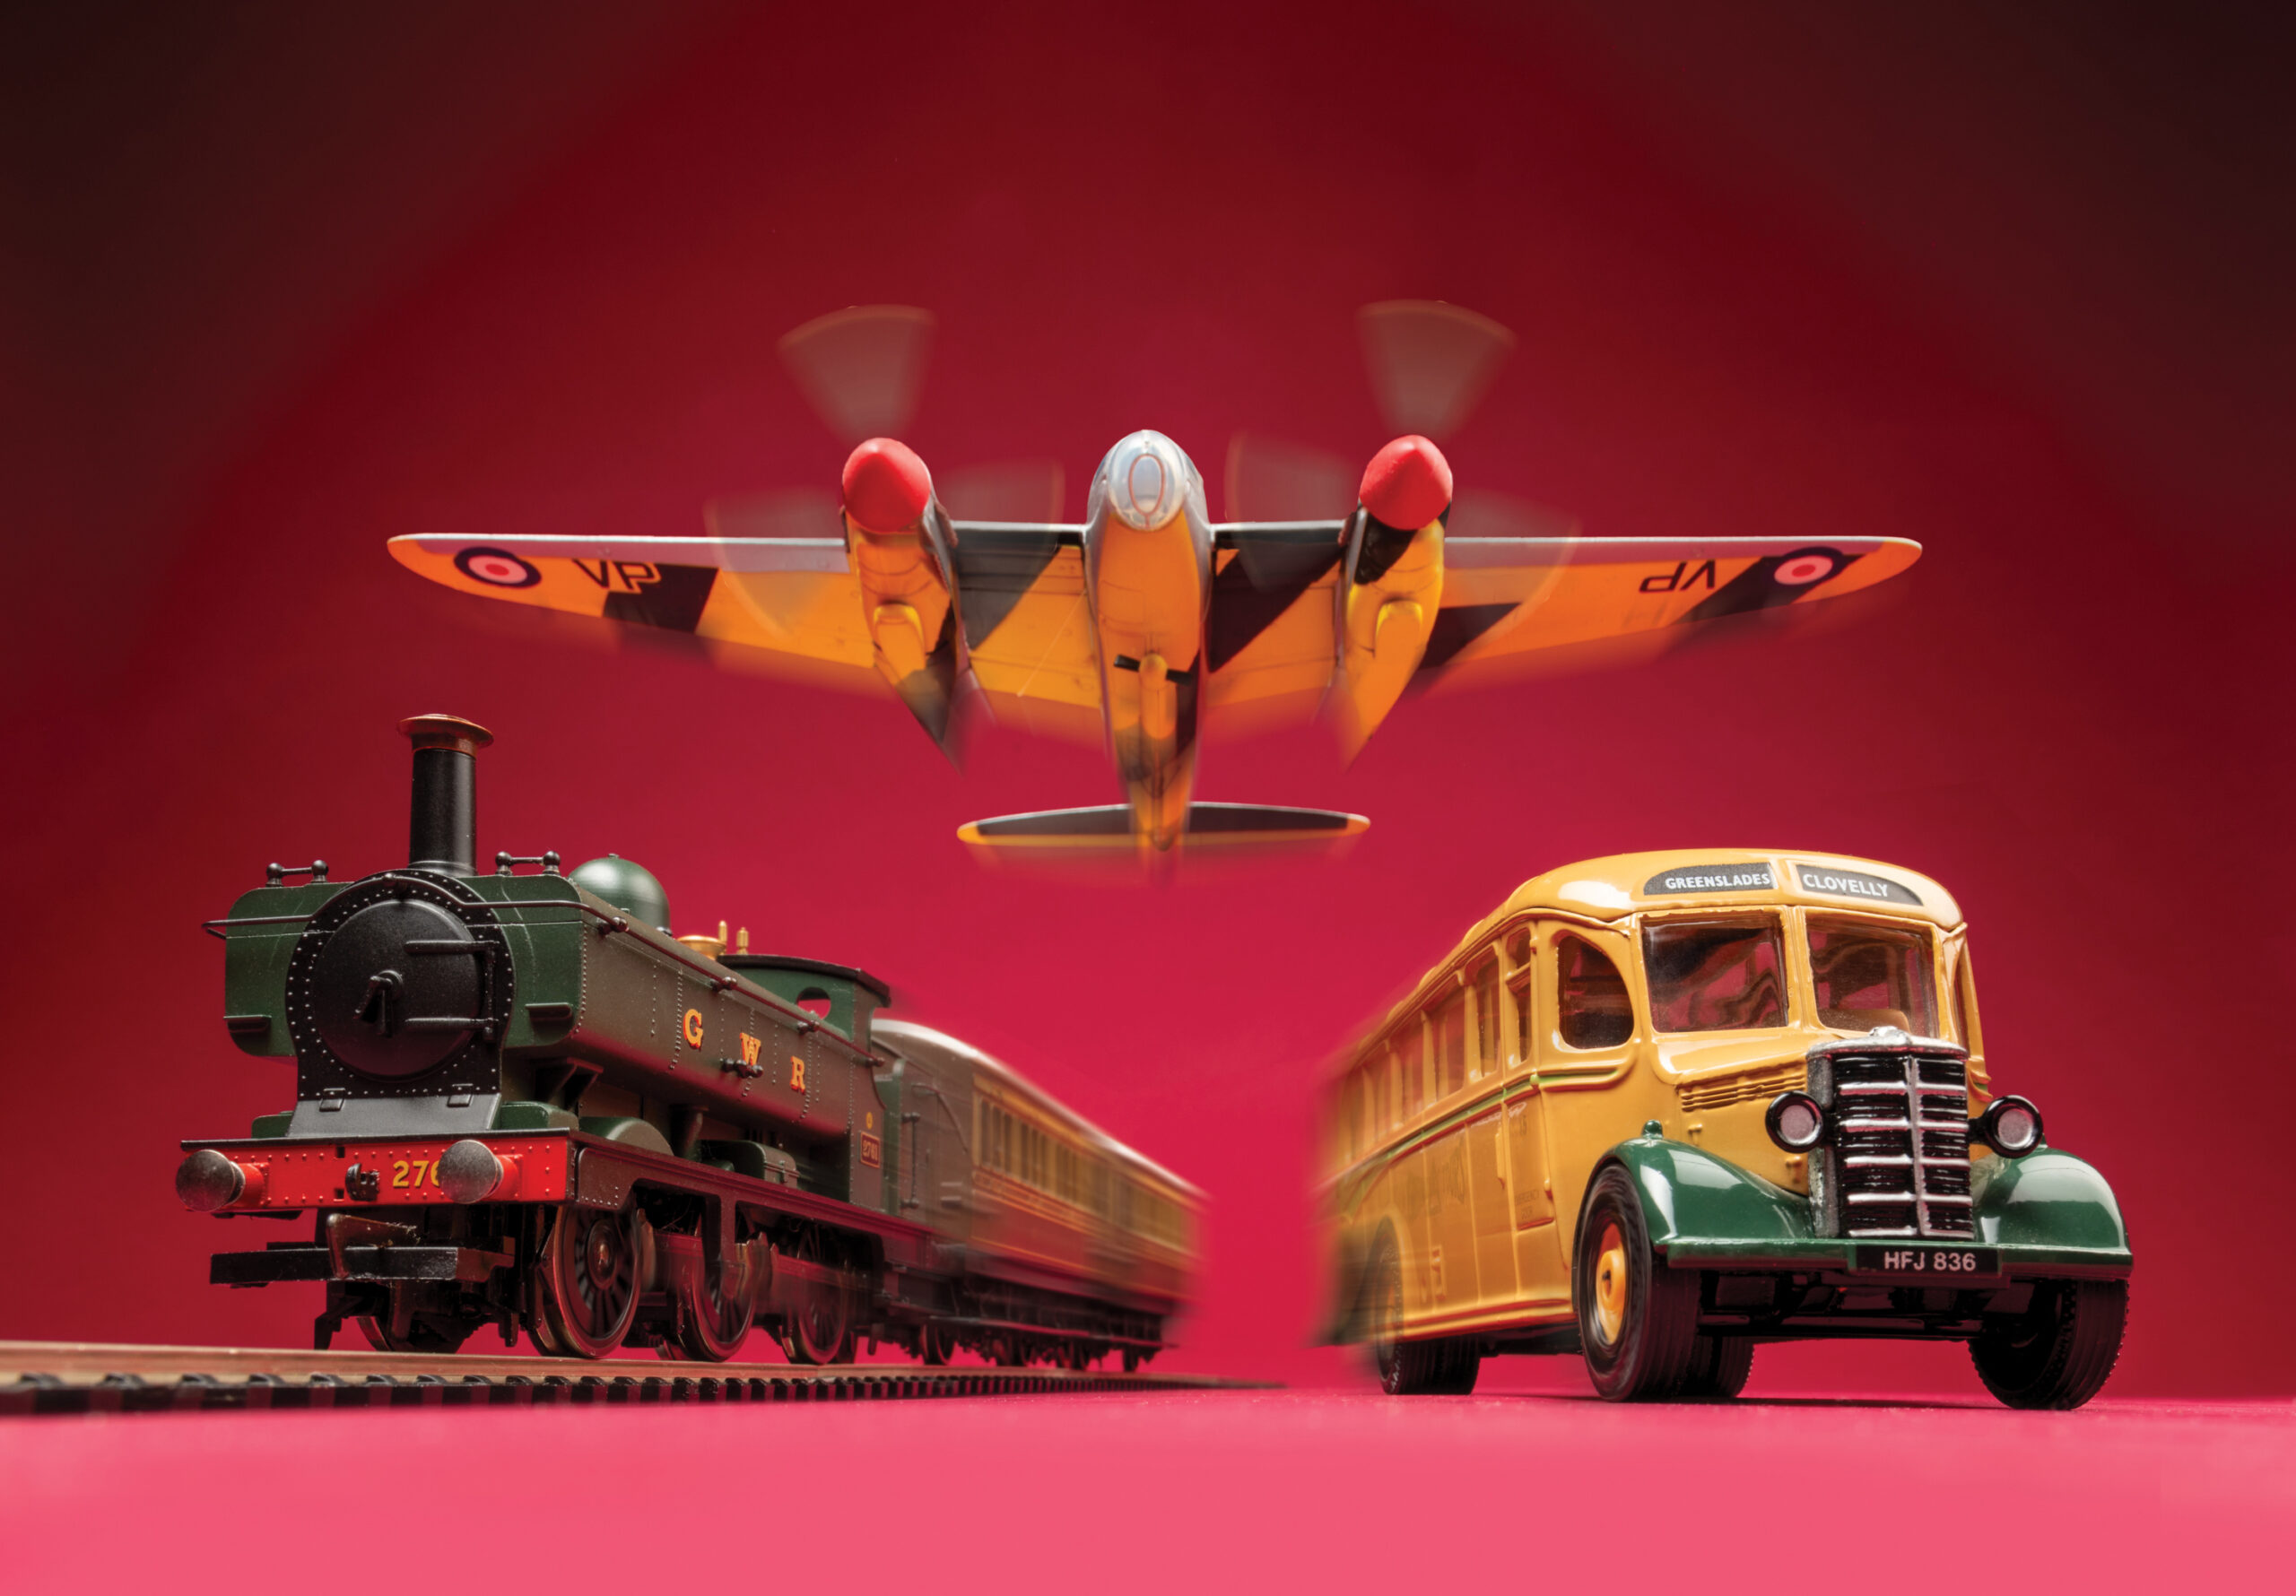 a toy train and bus on a red surface, with a toy plane hanging above them. the background is also red